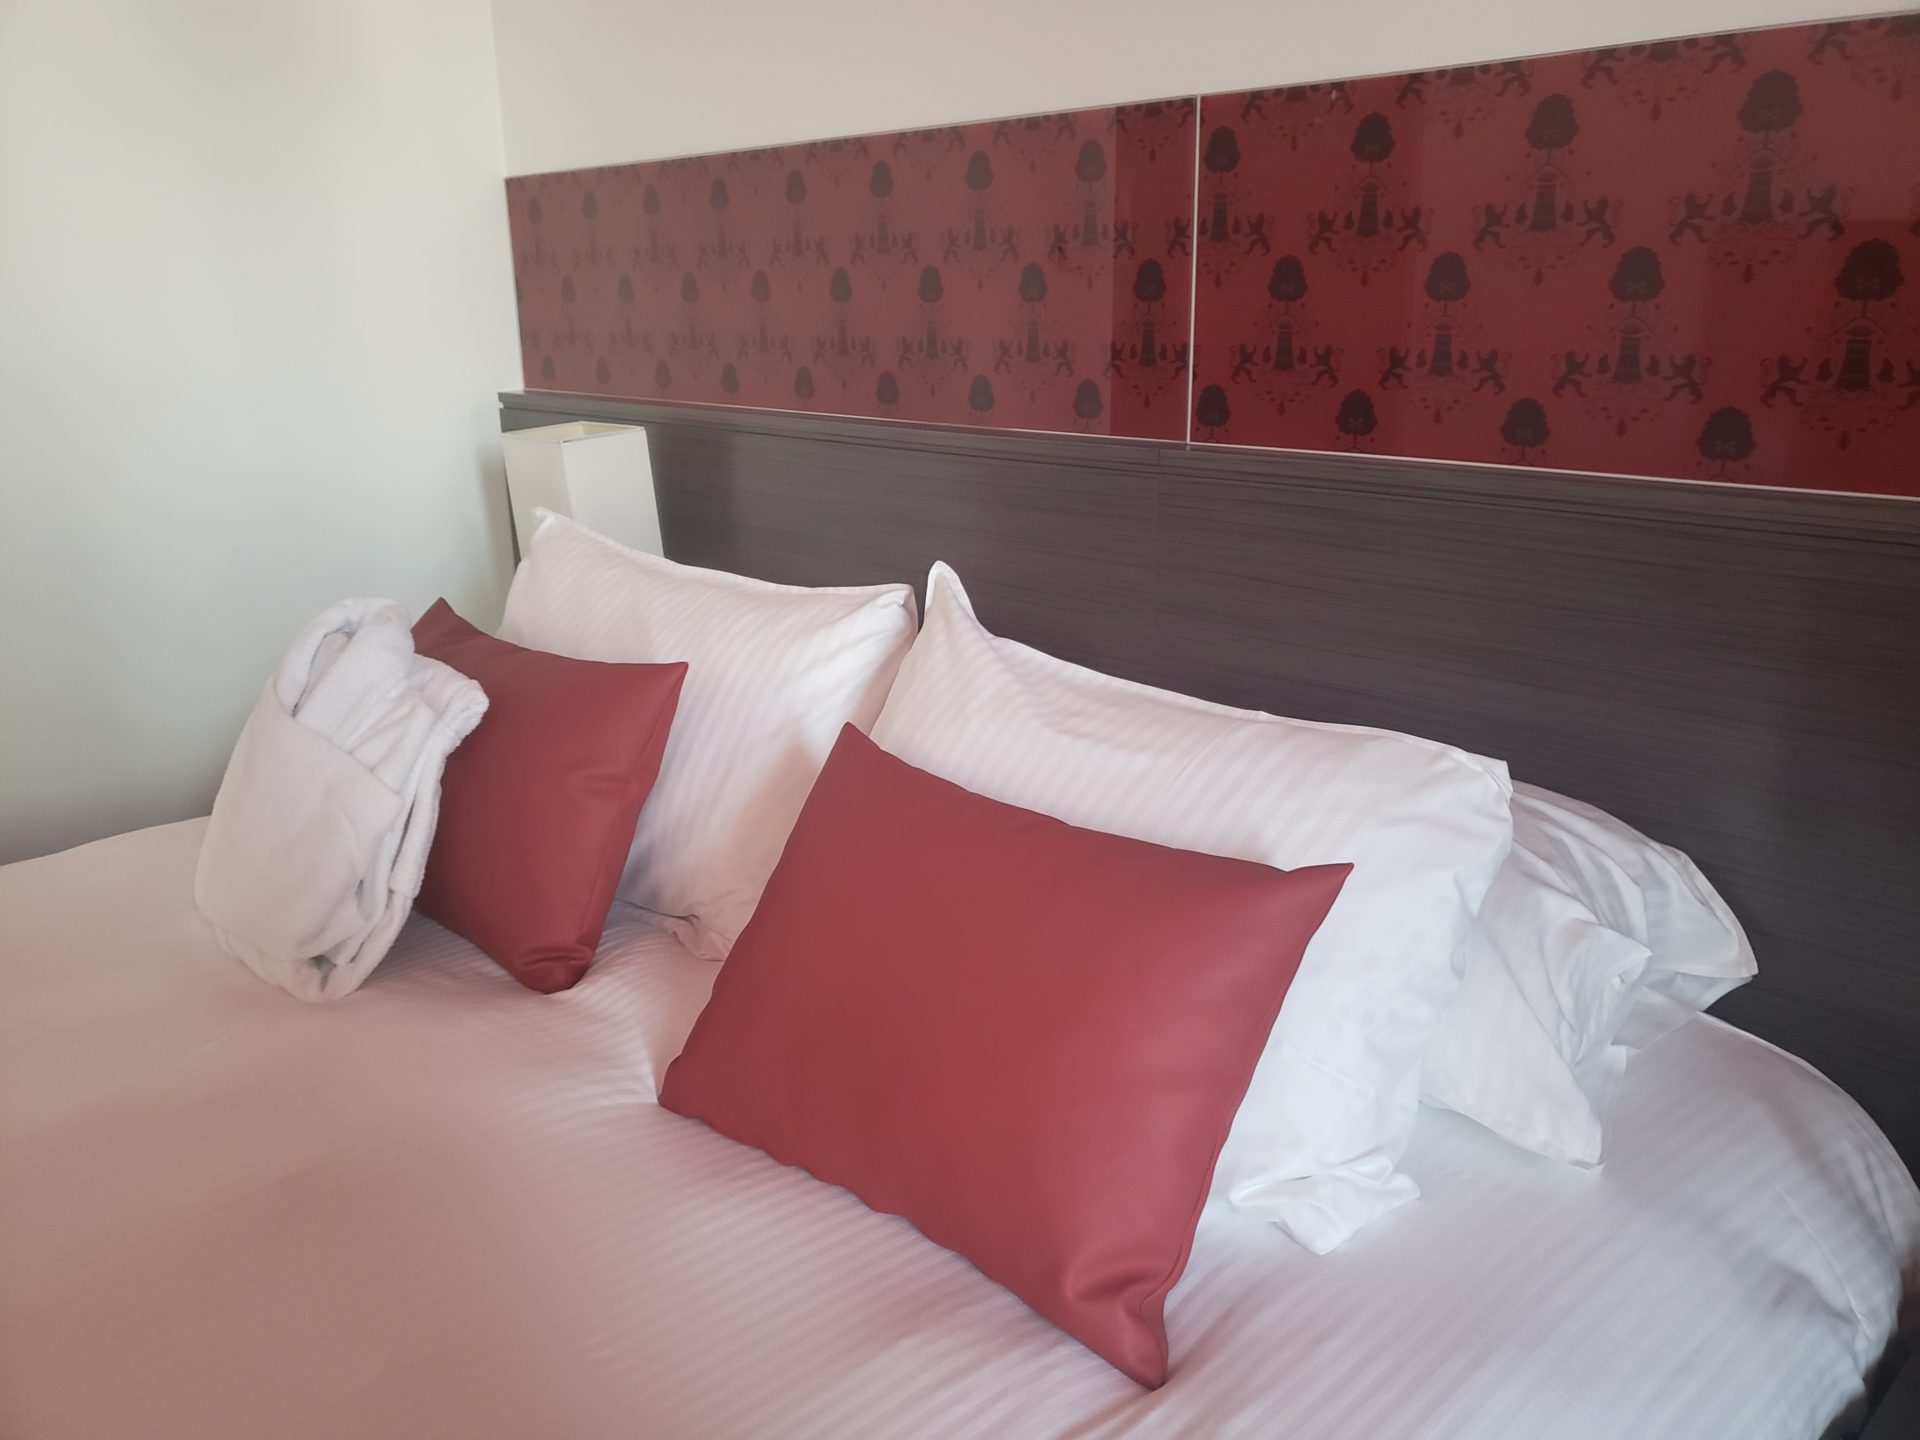 a bed with red pillows and a white robe